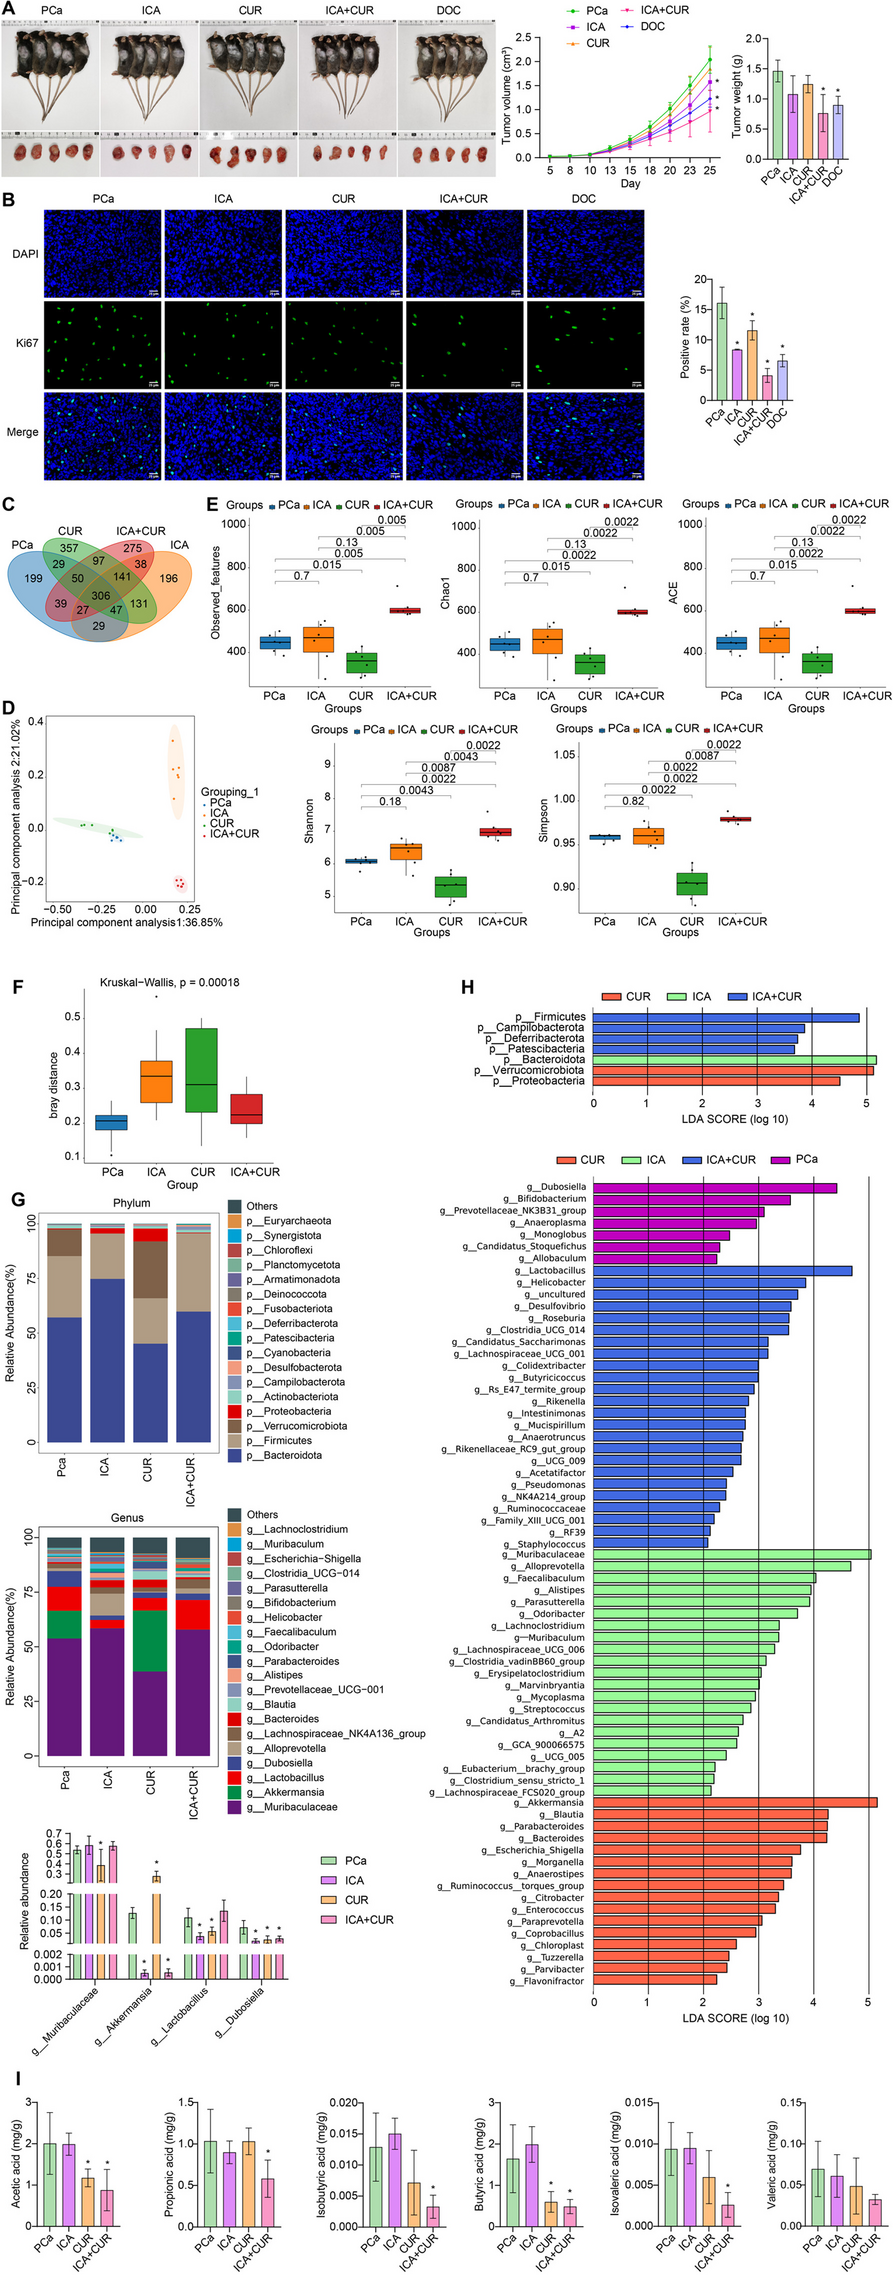 Icaritin-curcumol activates CD8+ T cells through regulation of gut microbiota and the DNMT1/IGFBP2 axis to suppress the development of prostate cancer